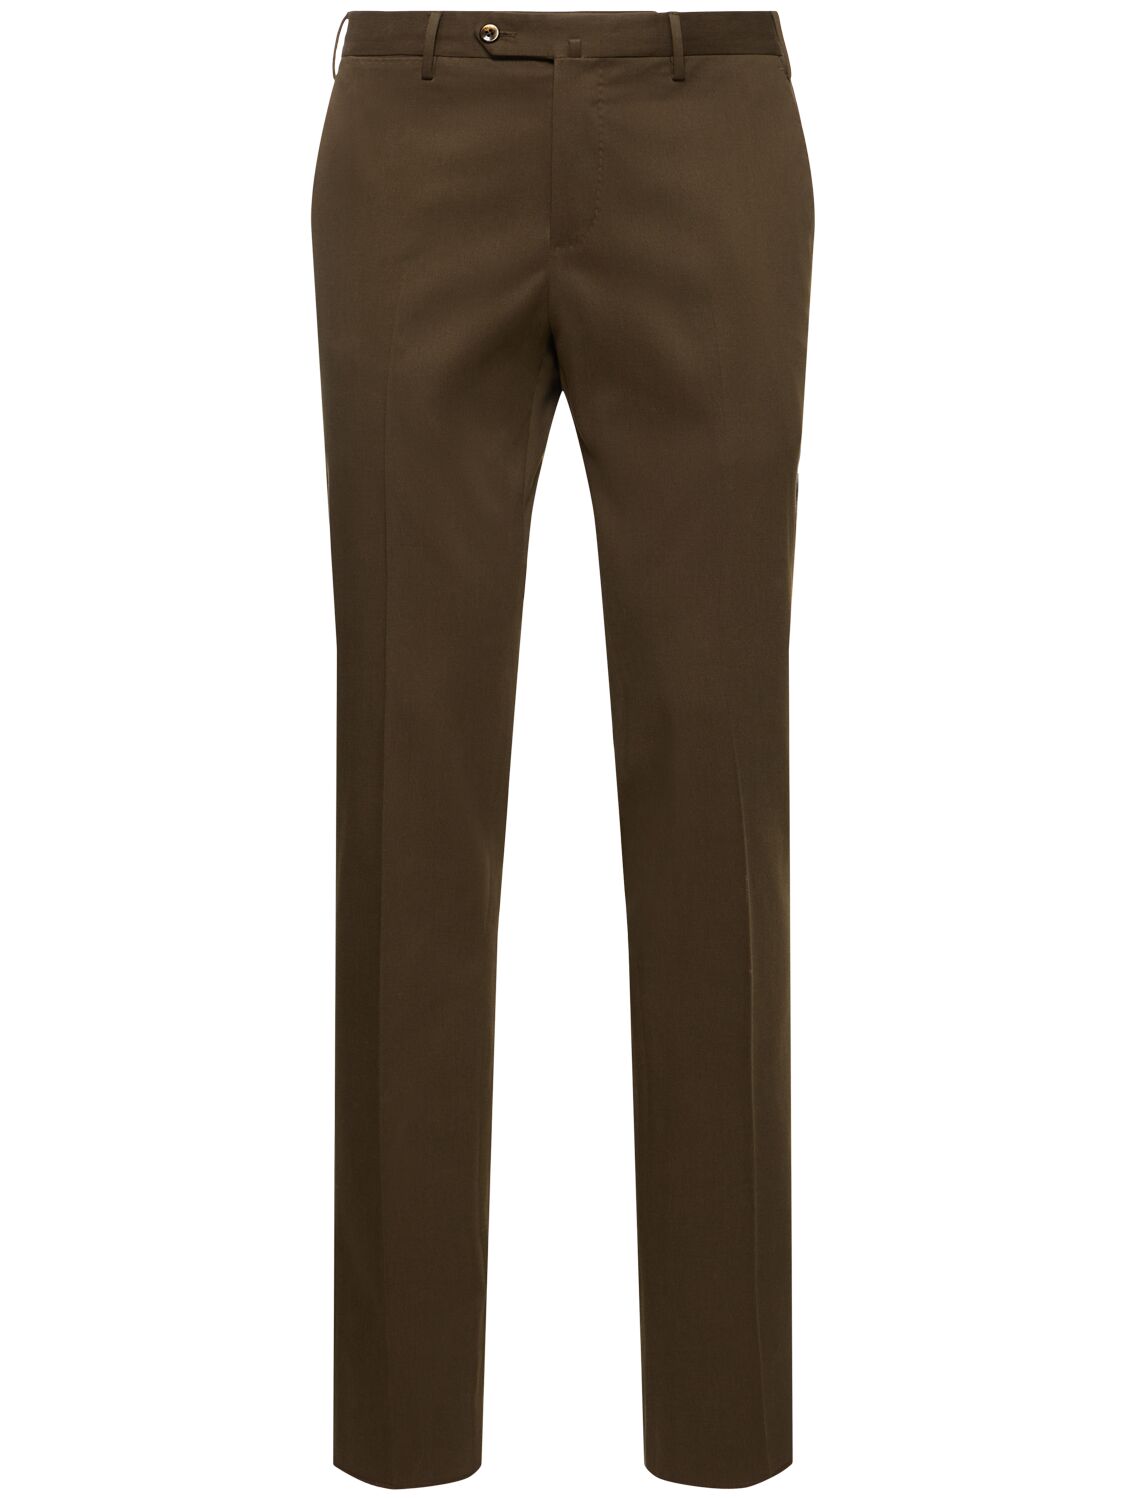 Pt Torino Classic Cotton Blend Straight Pants In Olive Green